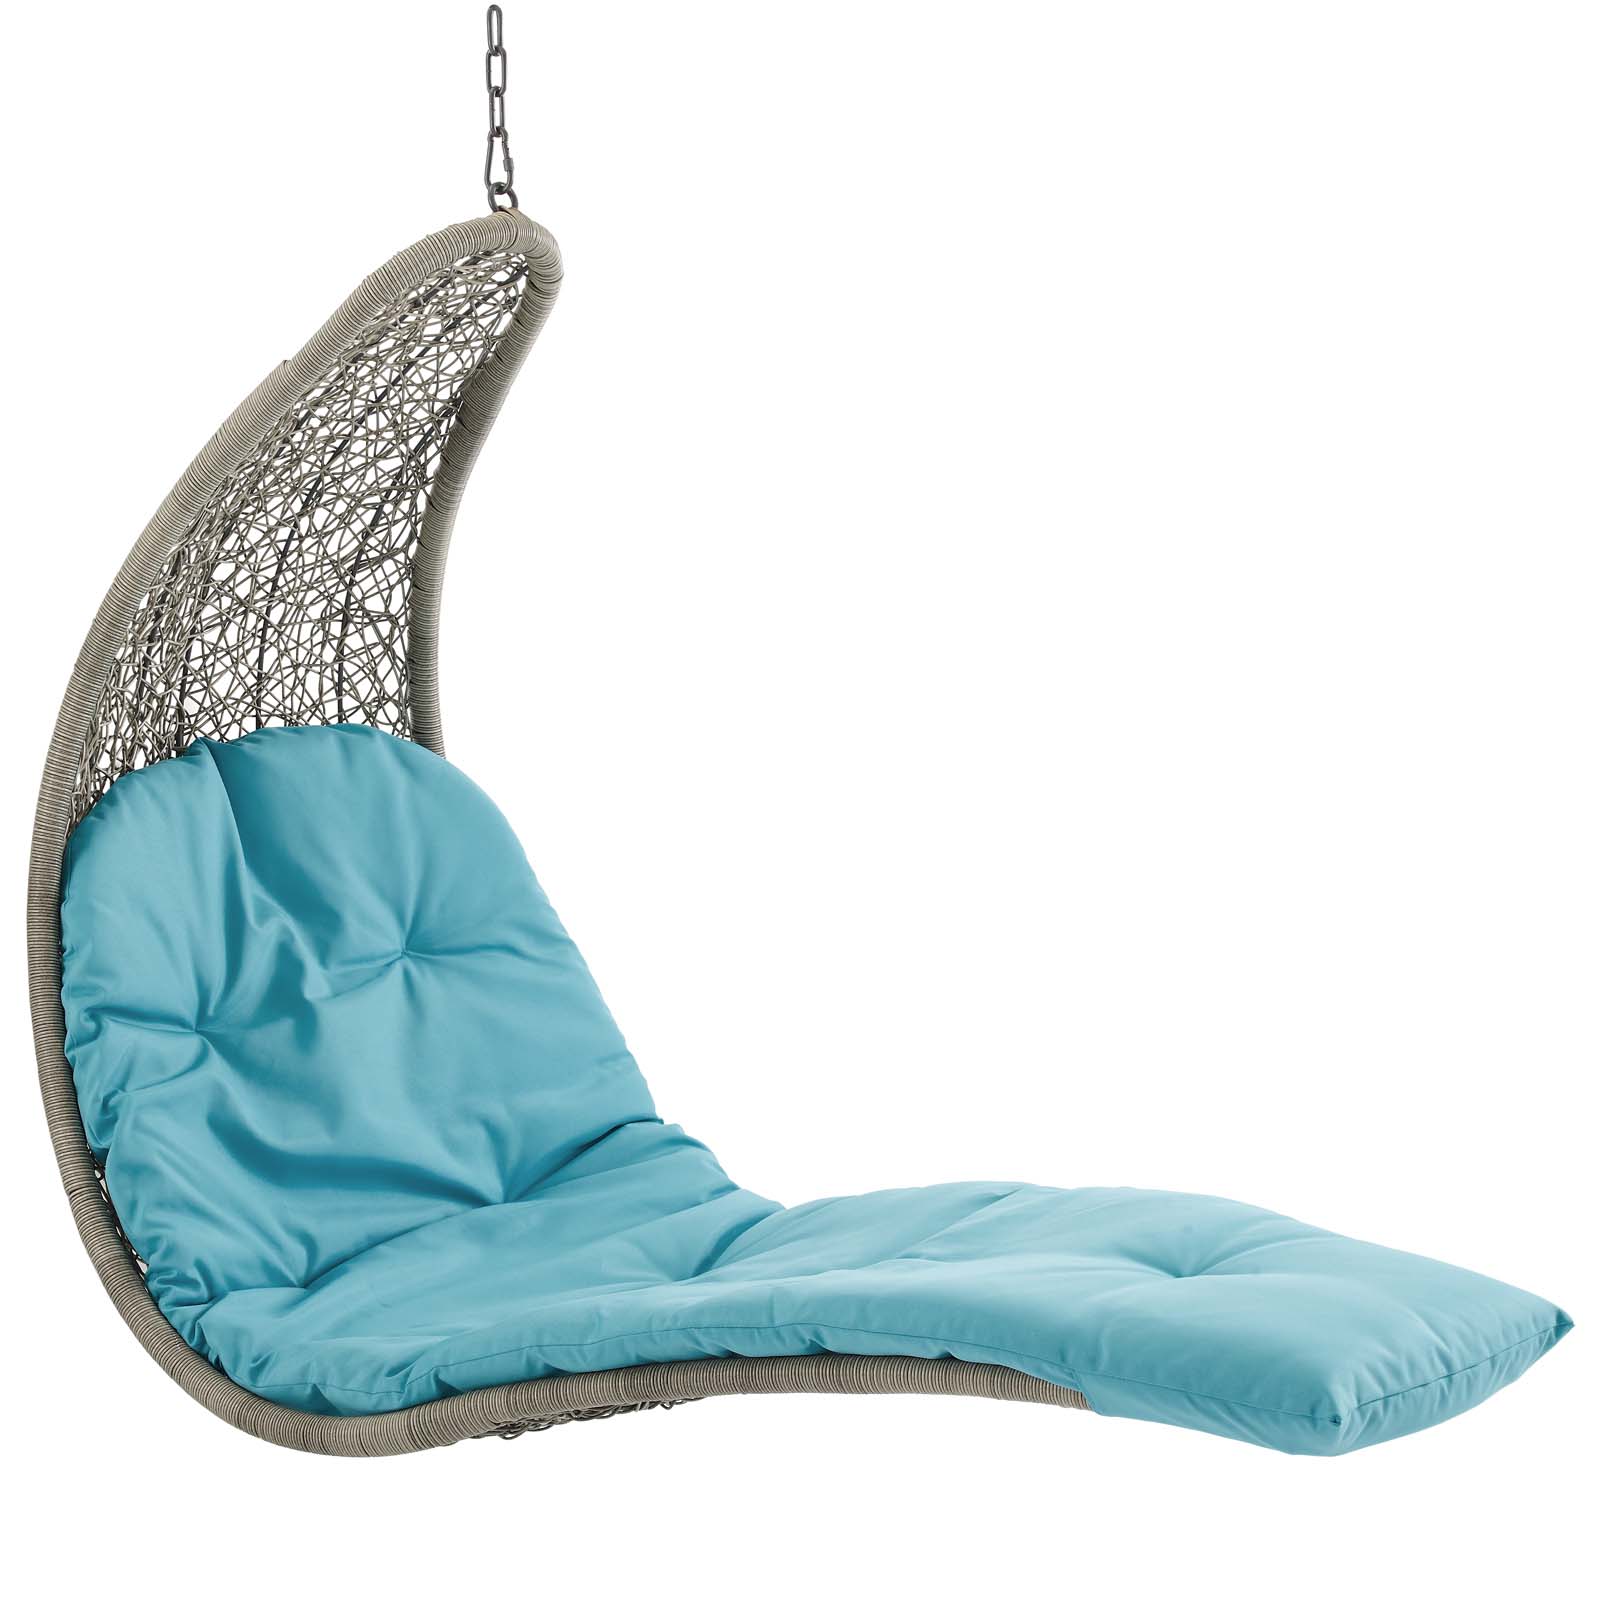 Modway Landscape Outdoor Patio Hanging Chaise Lounge Swing Chair, Multiple Colors - image 4 of 6